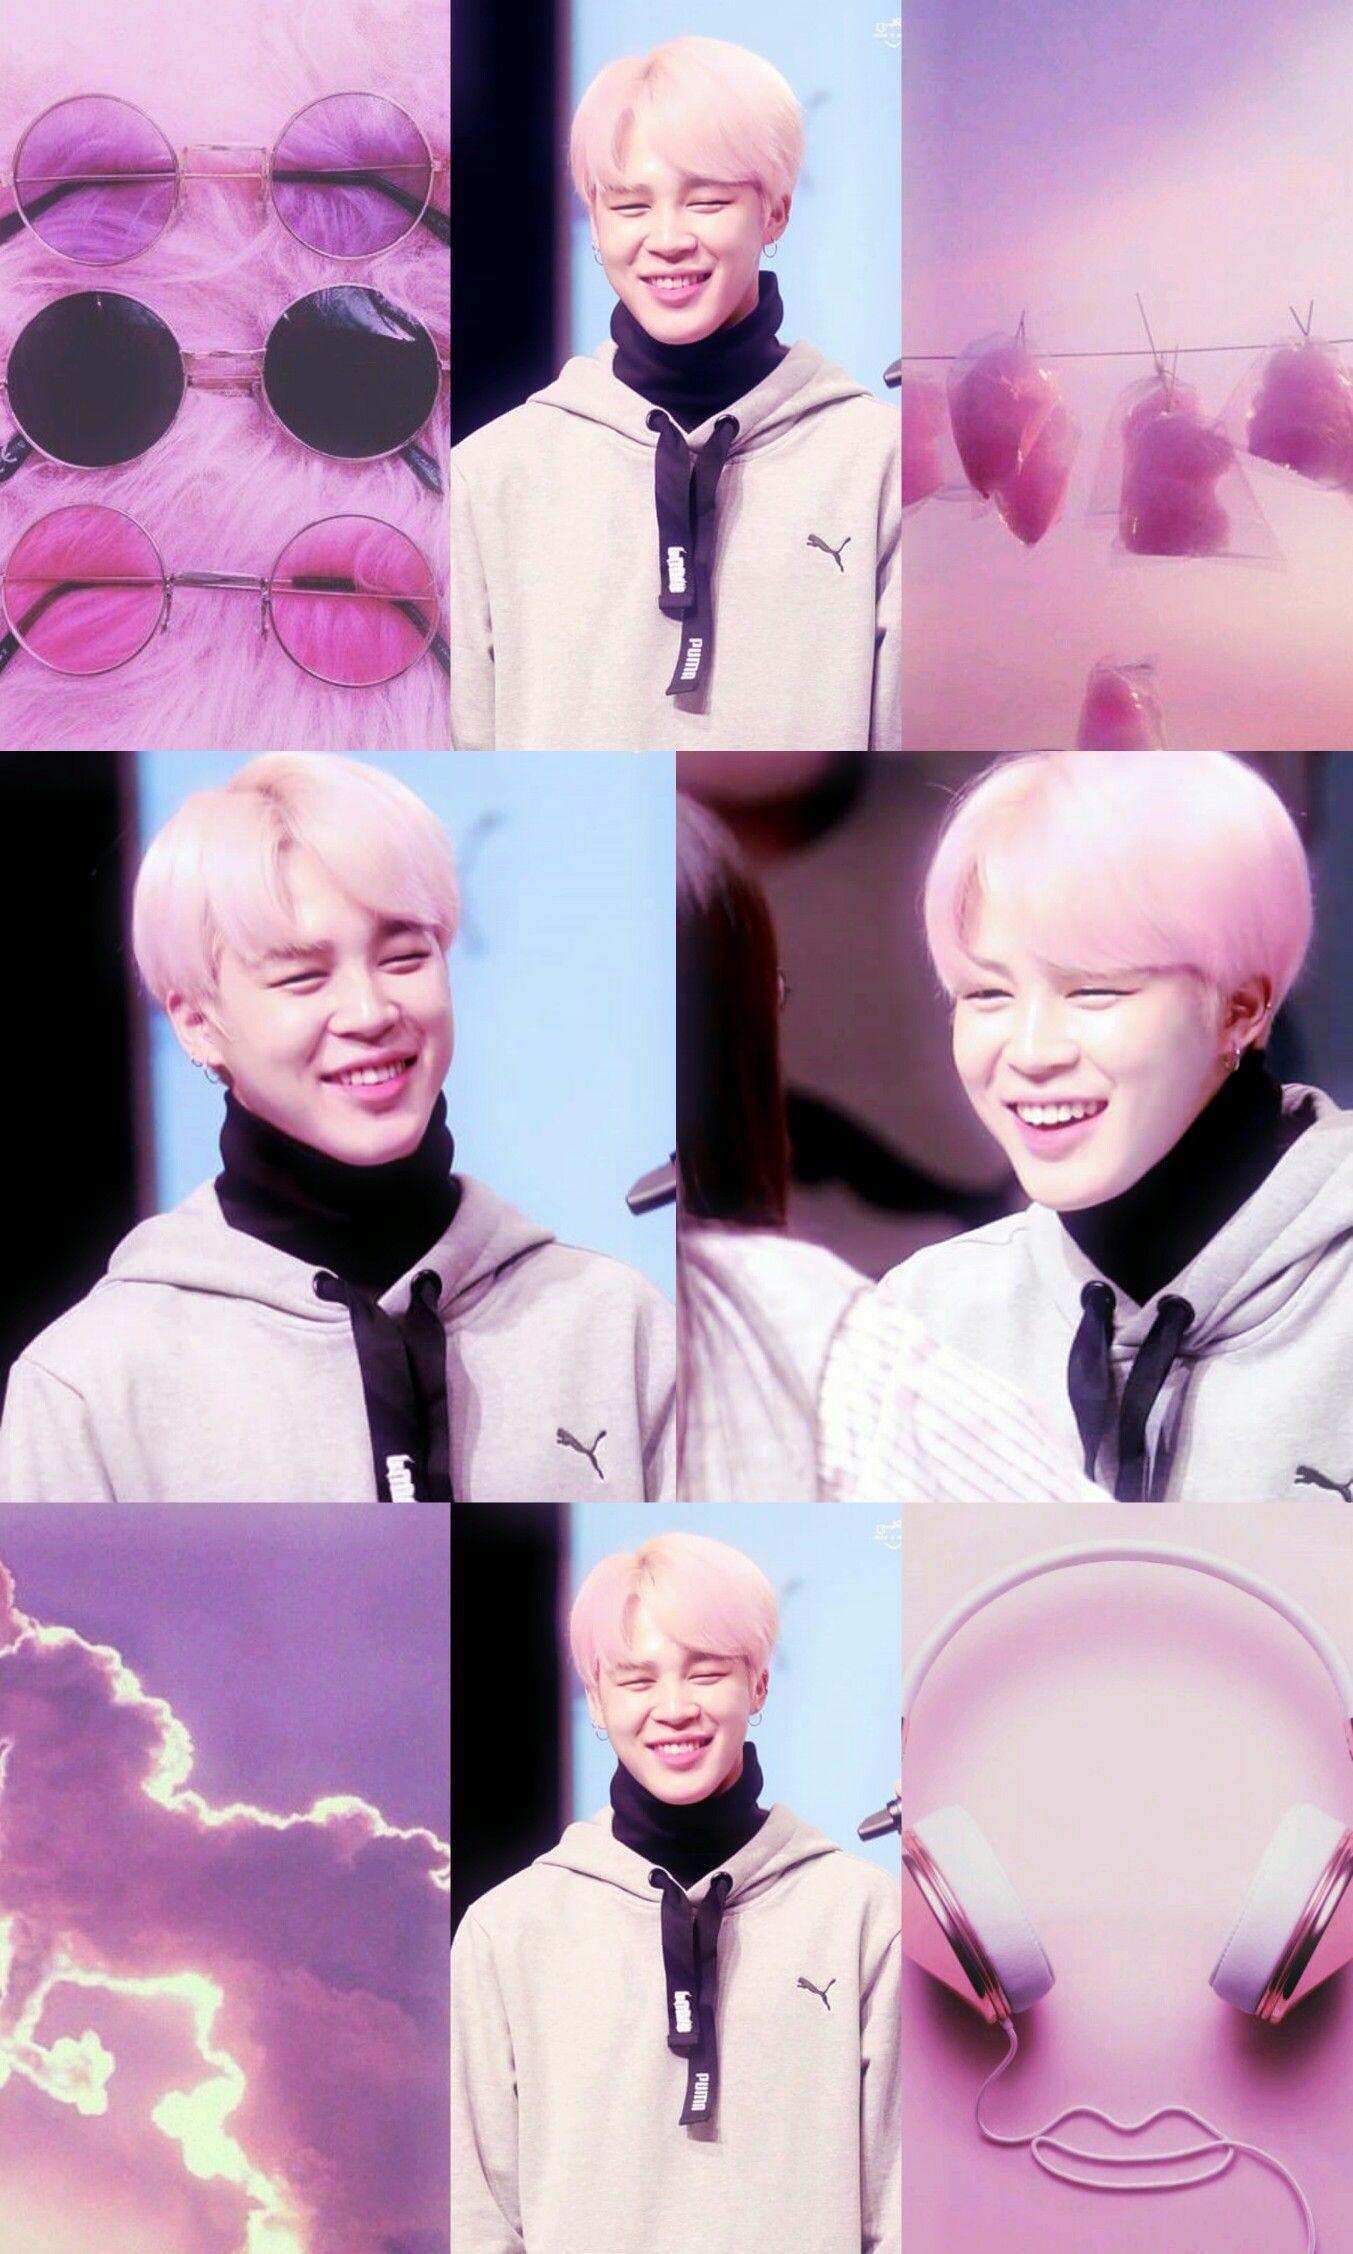 BTS Wallpapers on Twitter   BTS Park Jimin Aesthetic Wallpaper  pls  give credits if you want to repost  SAVE  RT amp LIKE FIRST   httpstcoK59y7lzfoh  X